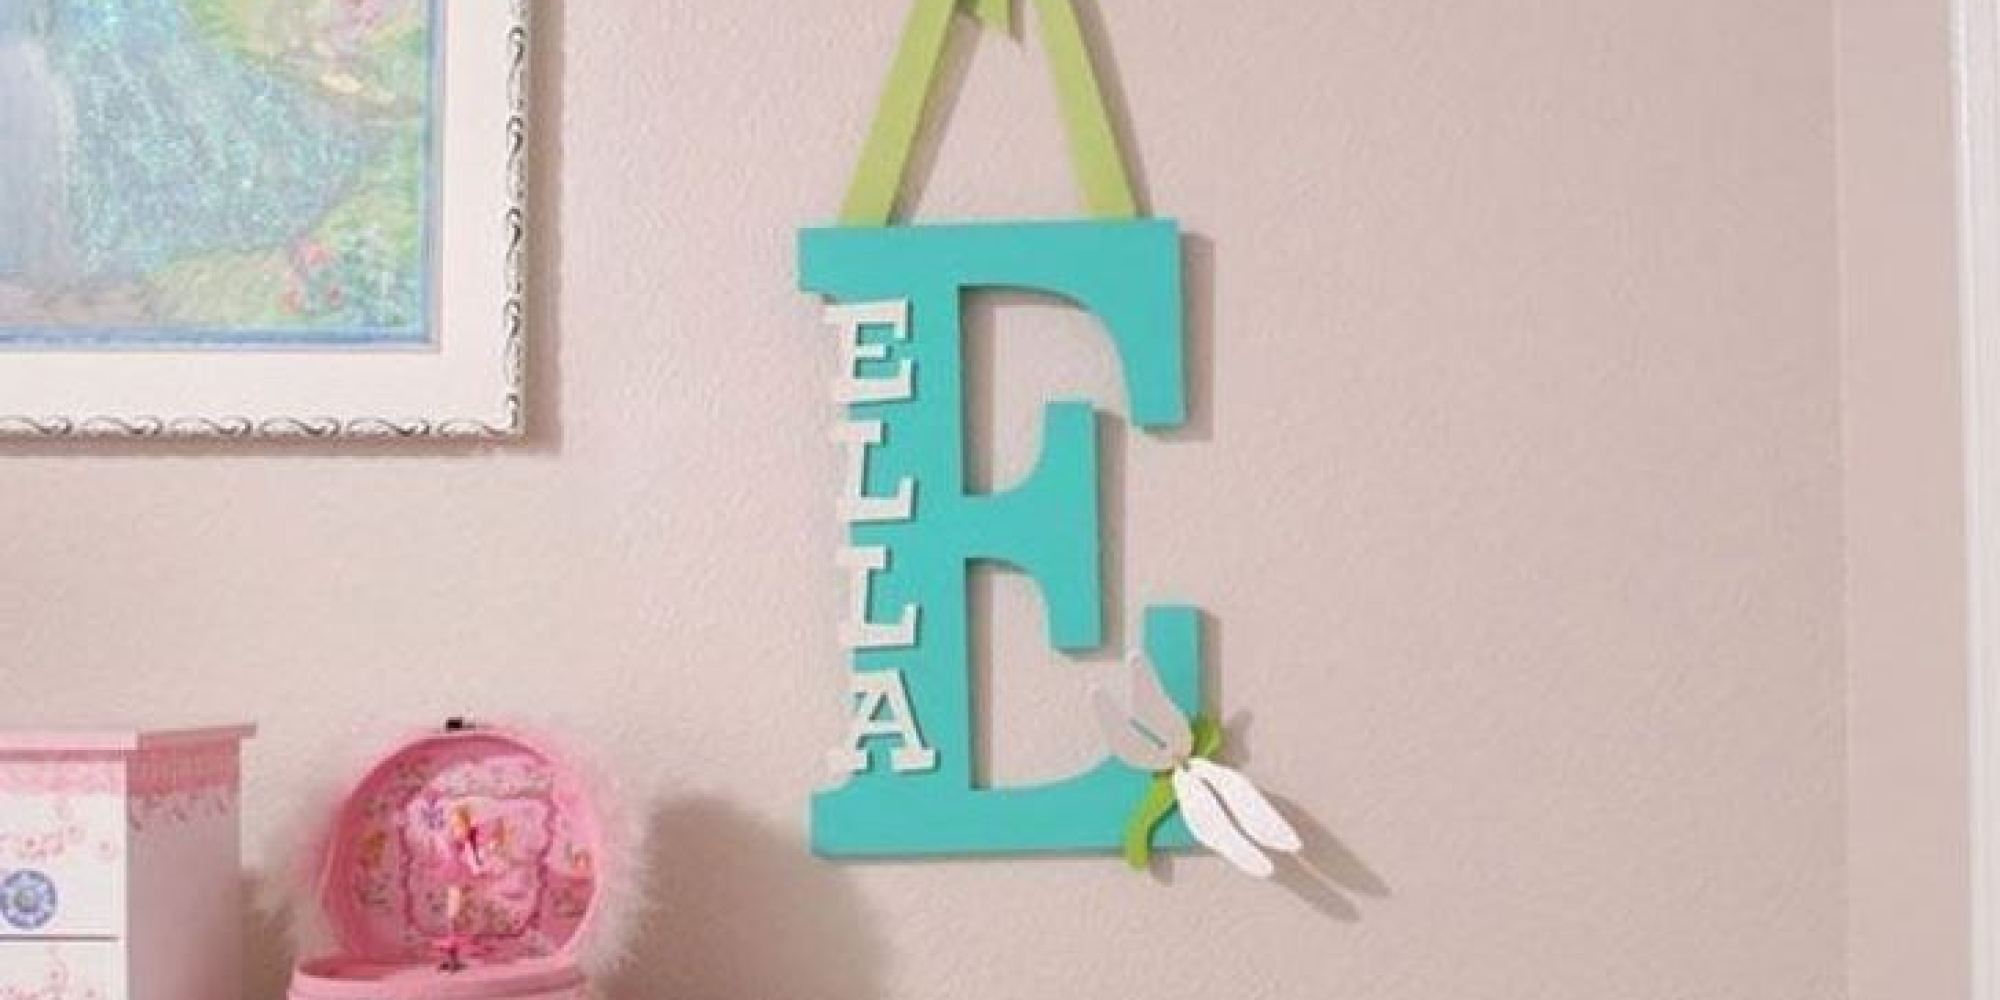 Baby Name Room Decor
 Baby Name Decor 15 Ways To Personalize Your Baby s Nursery